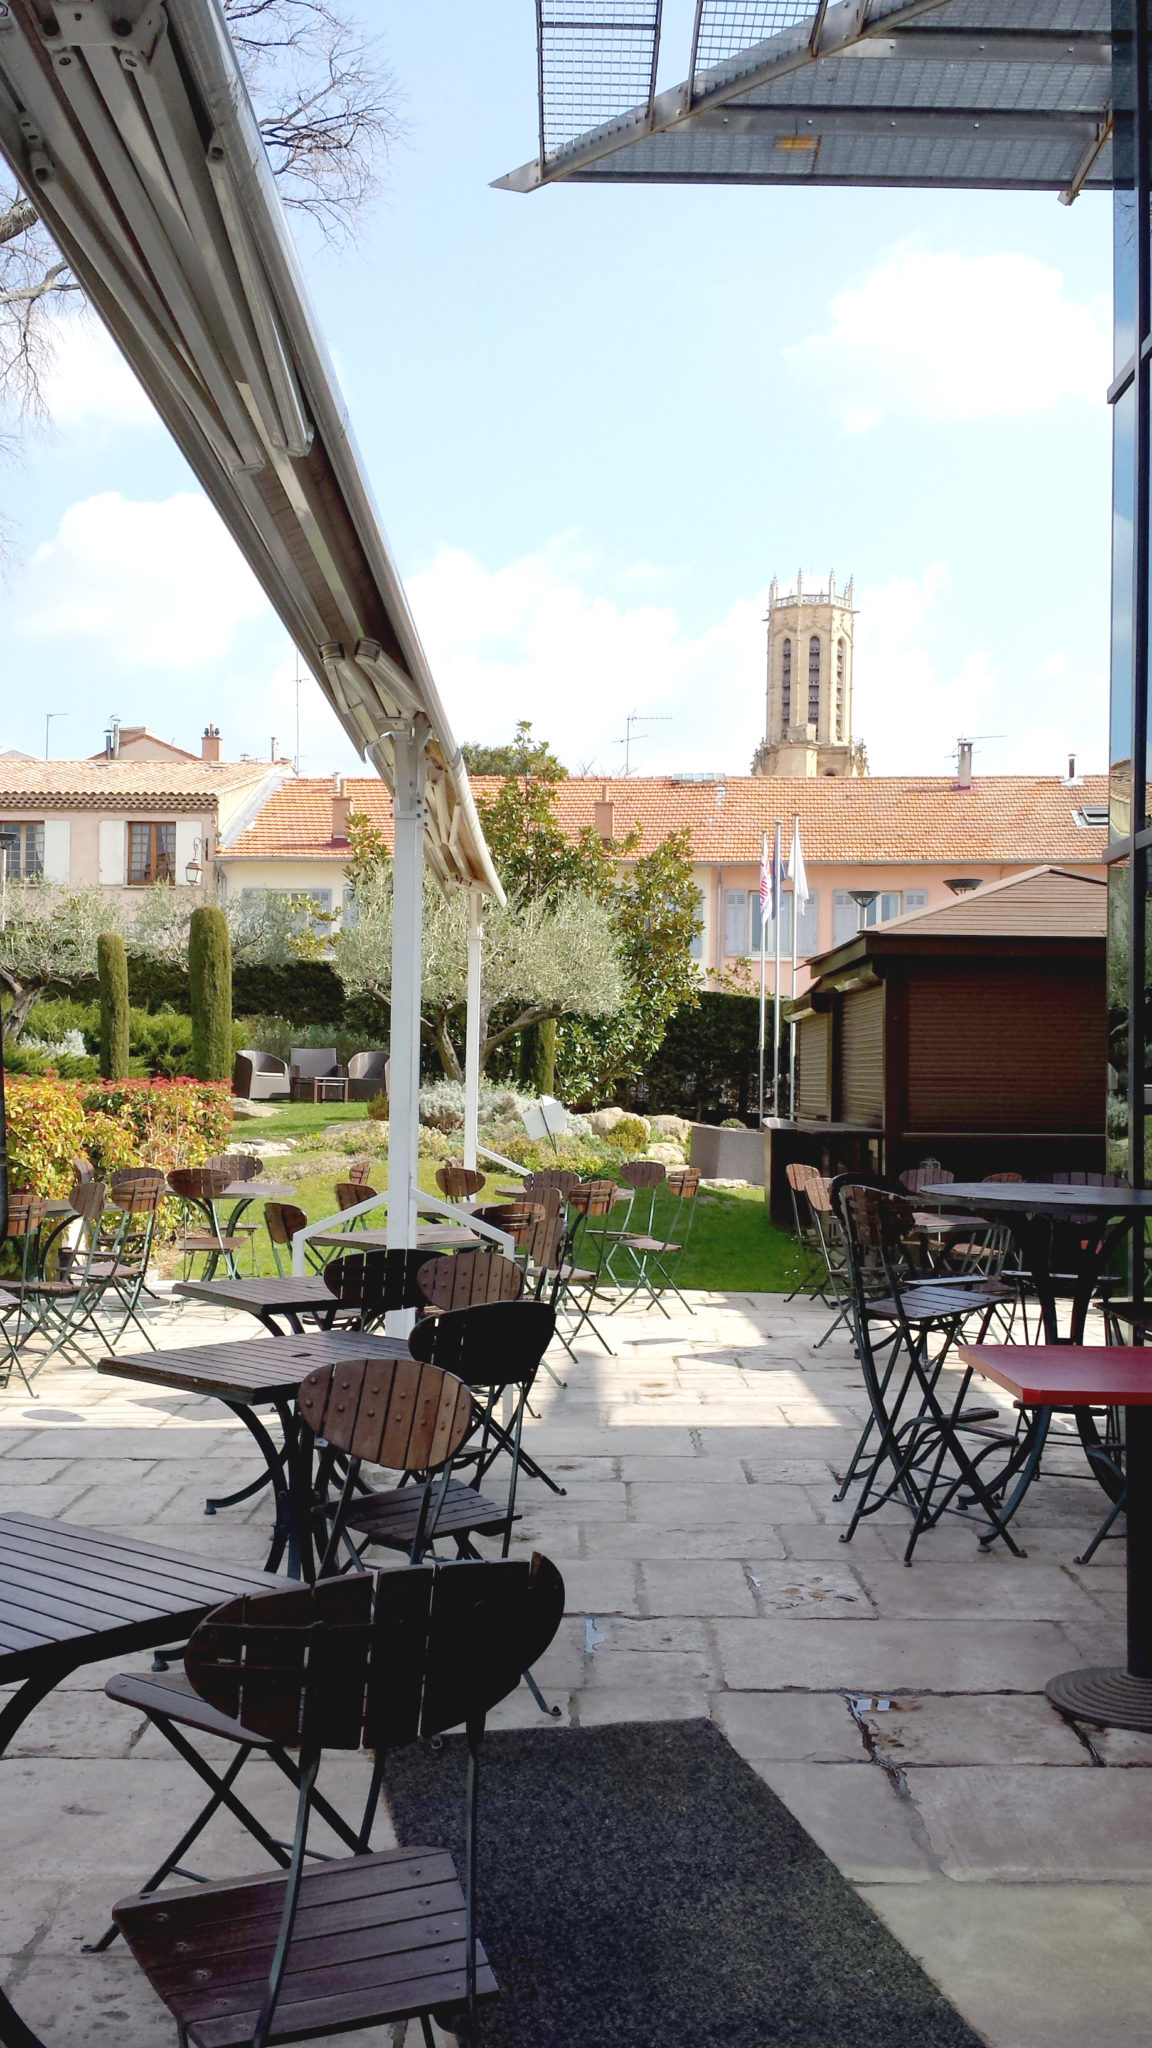 Journee_cocooning_aixenprovence_spa_thermes_sextius_terrasse_orangerie_2